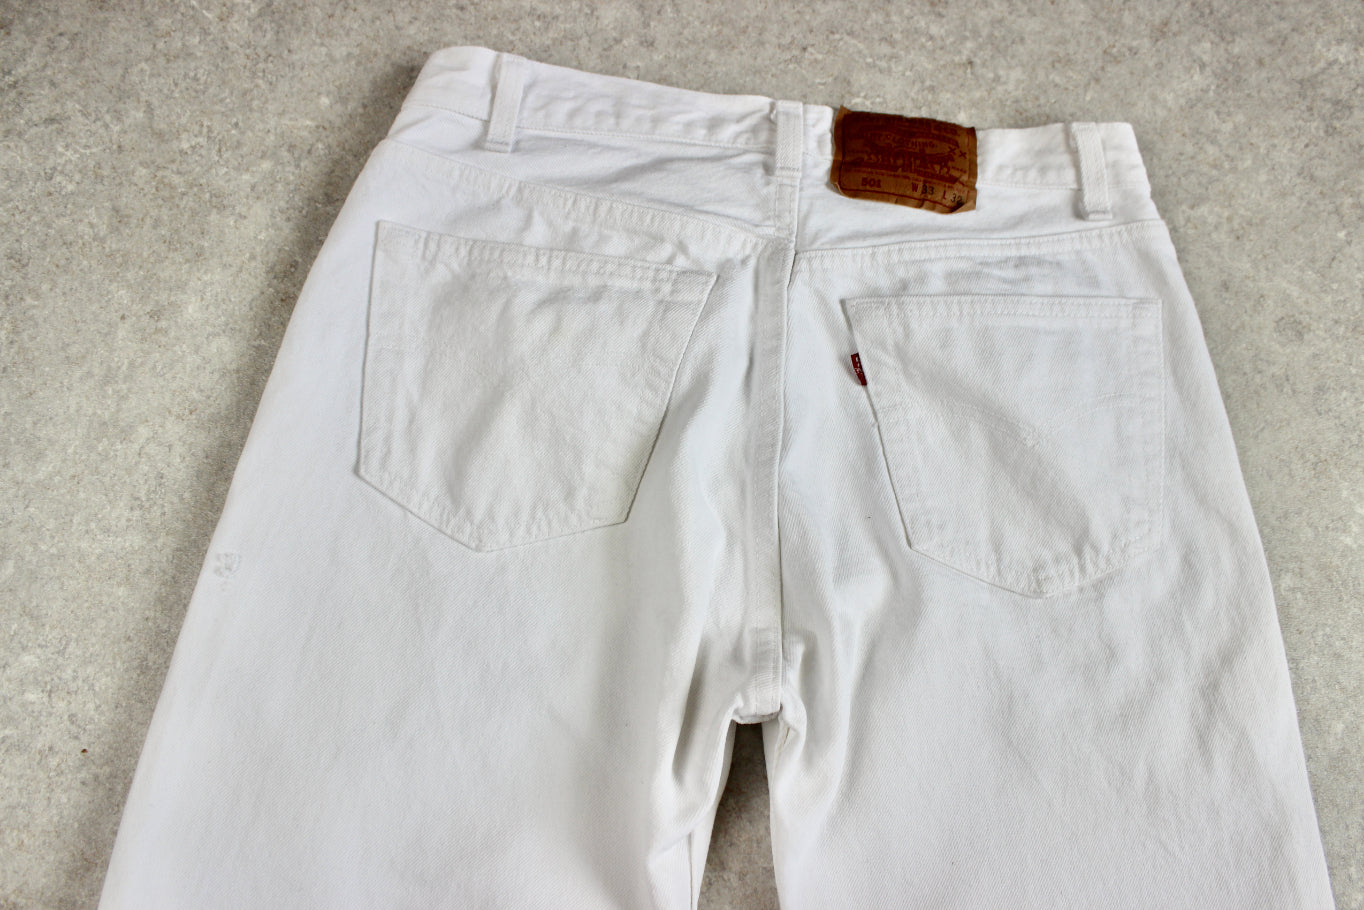 Levi's - 501 Jeans Vintage Made in USA - White - 33/32